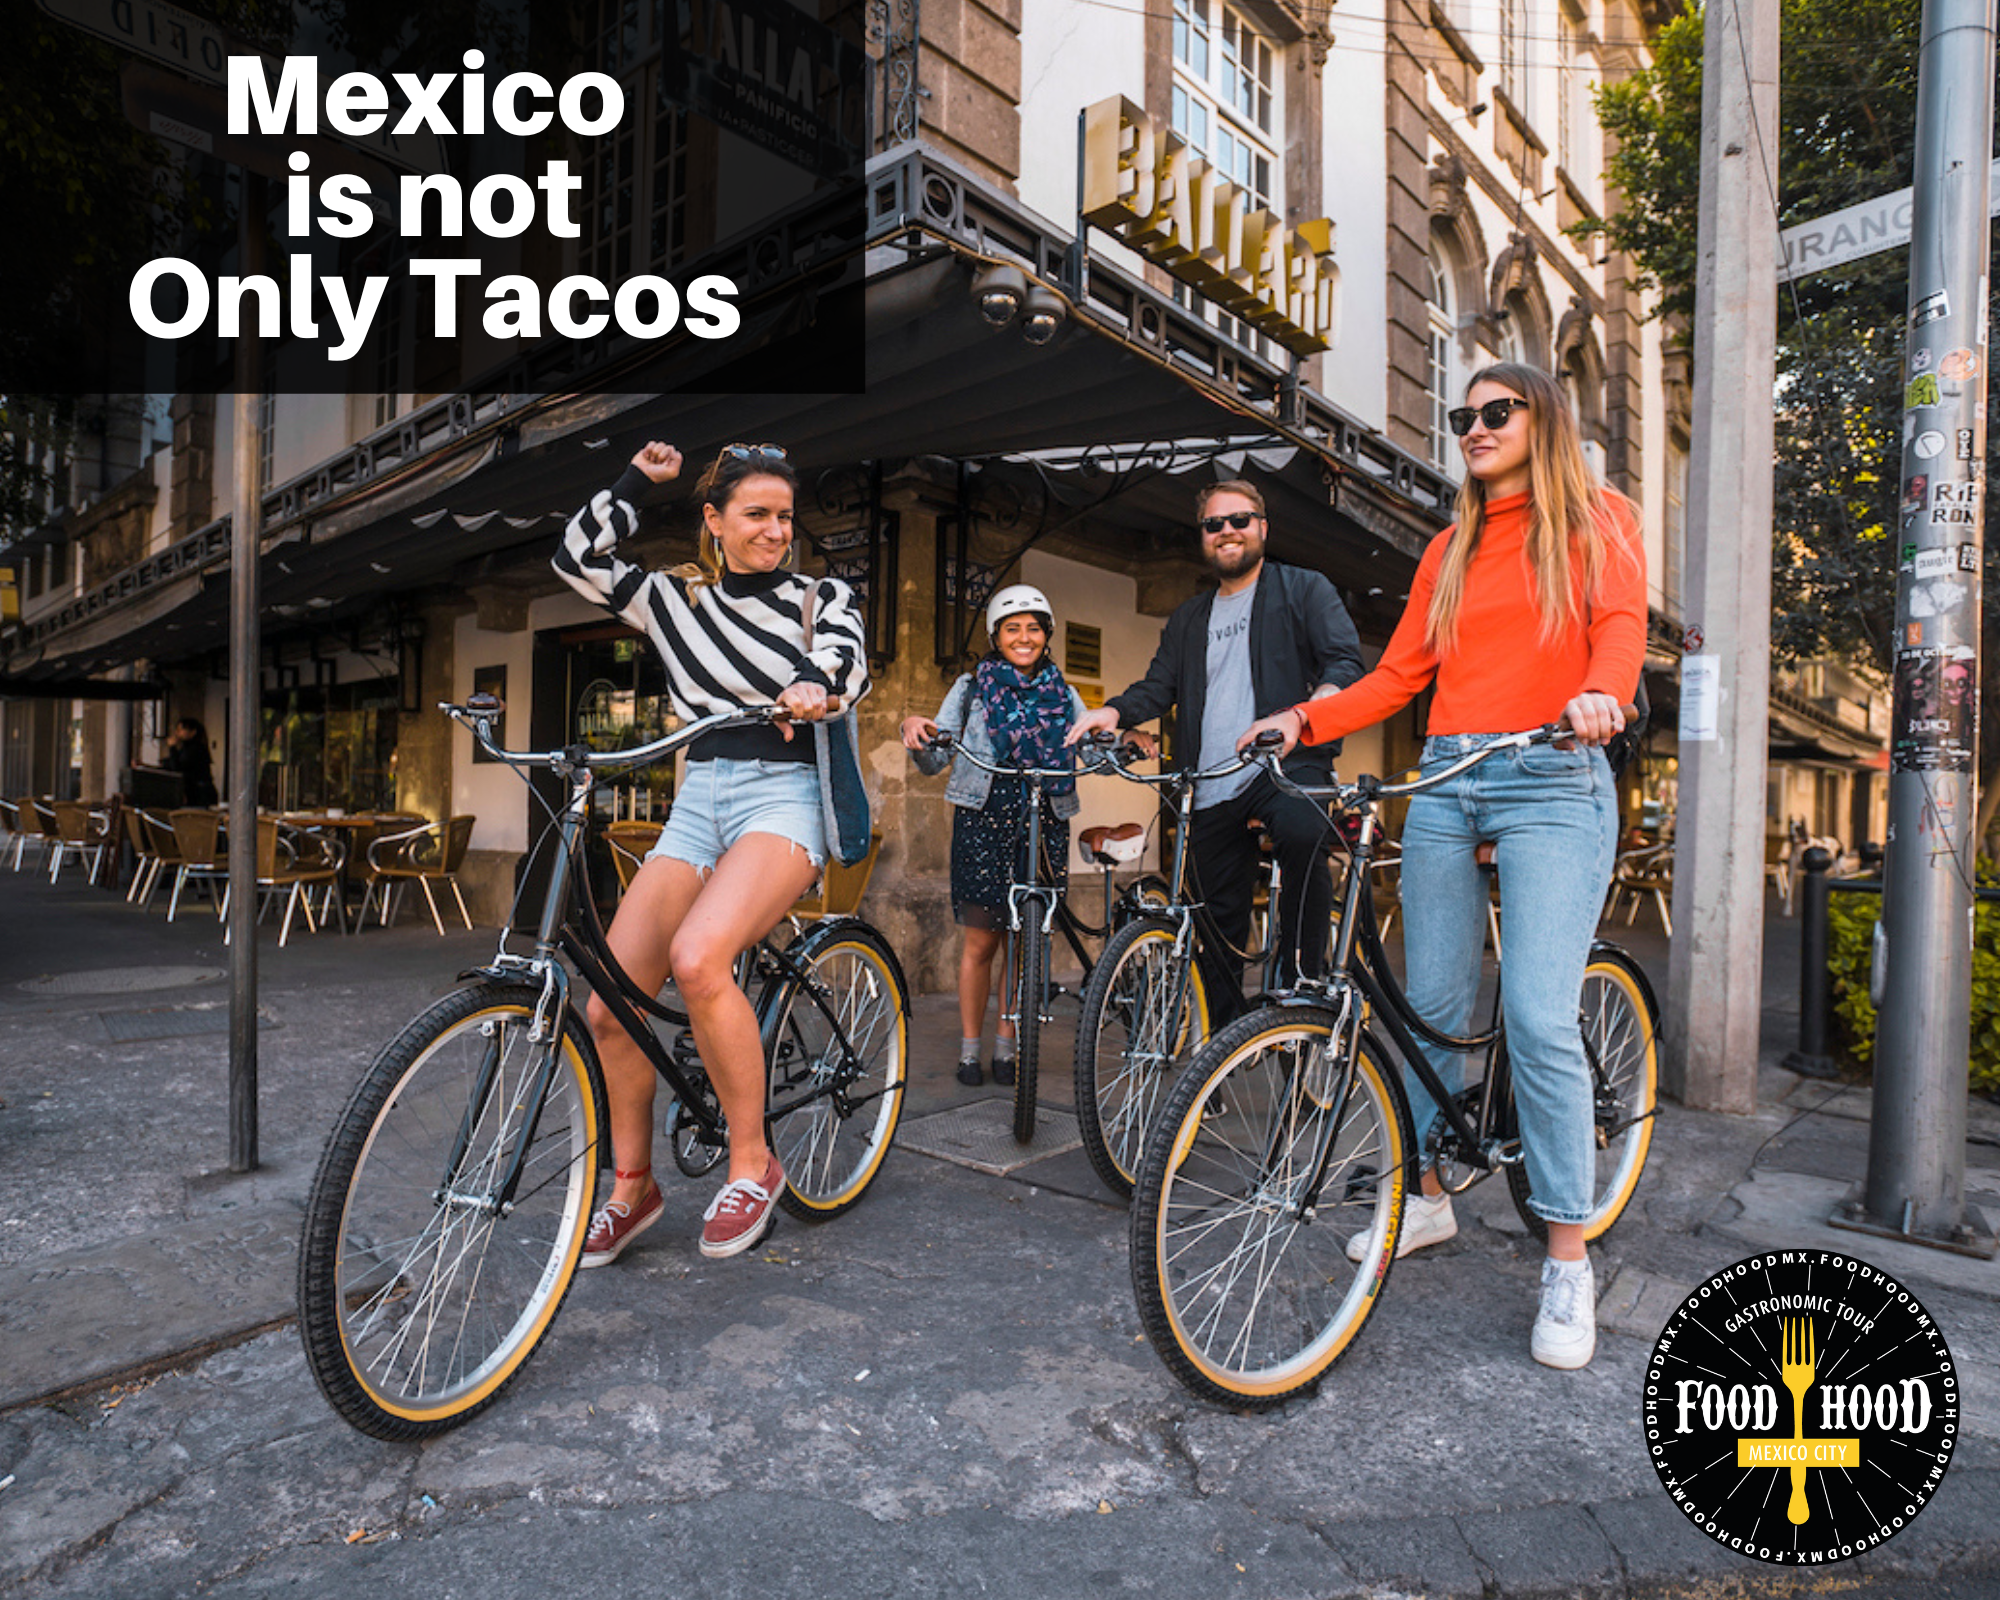 Food Tour Bike Tour Mexico City Street Food Things to do in Mexico City MExico is not Only Tacos